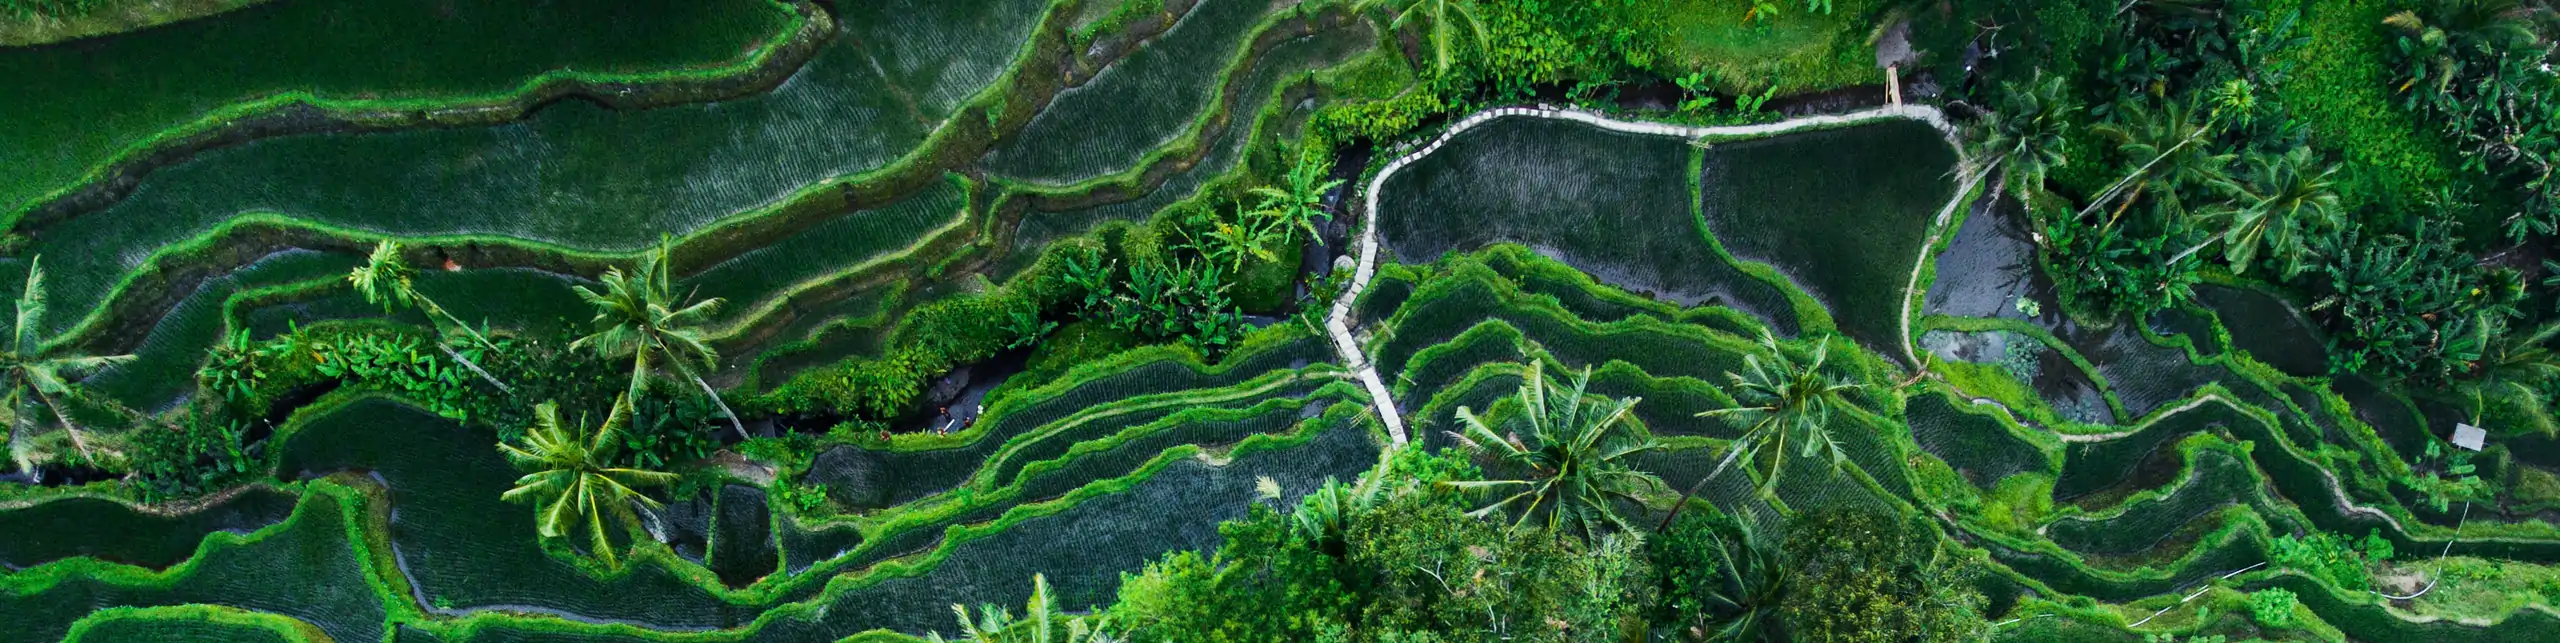 Tegallalang Rice terraces, Indonesia.